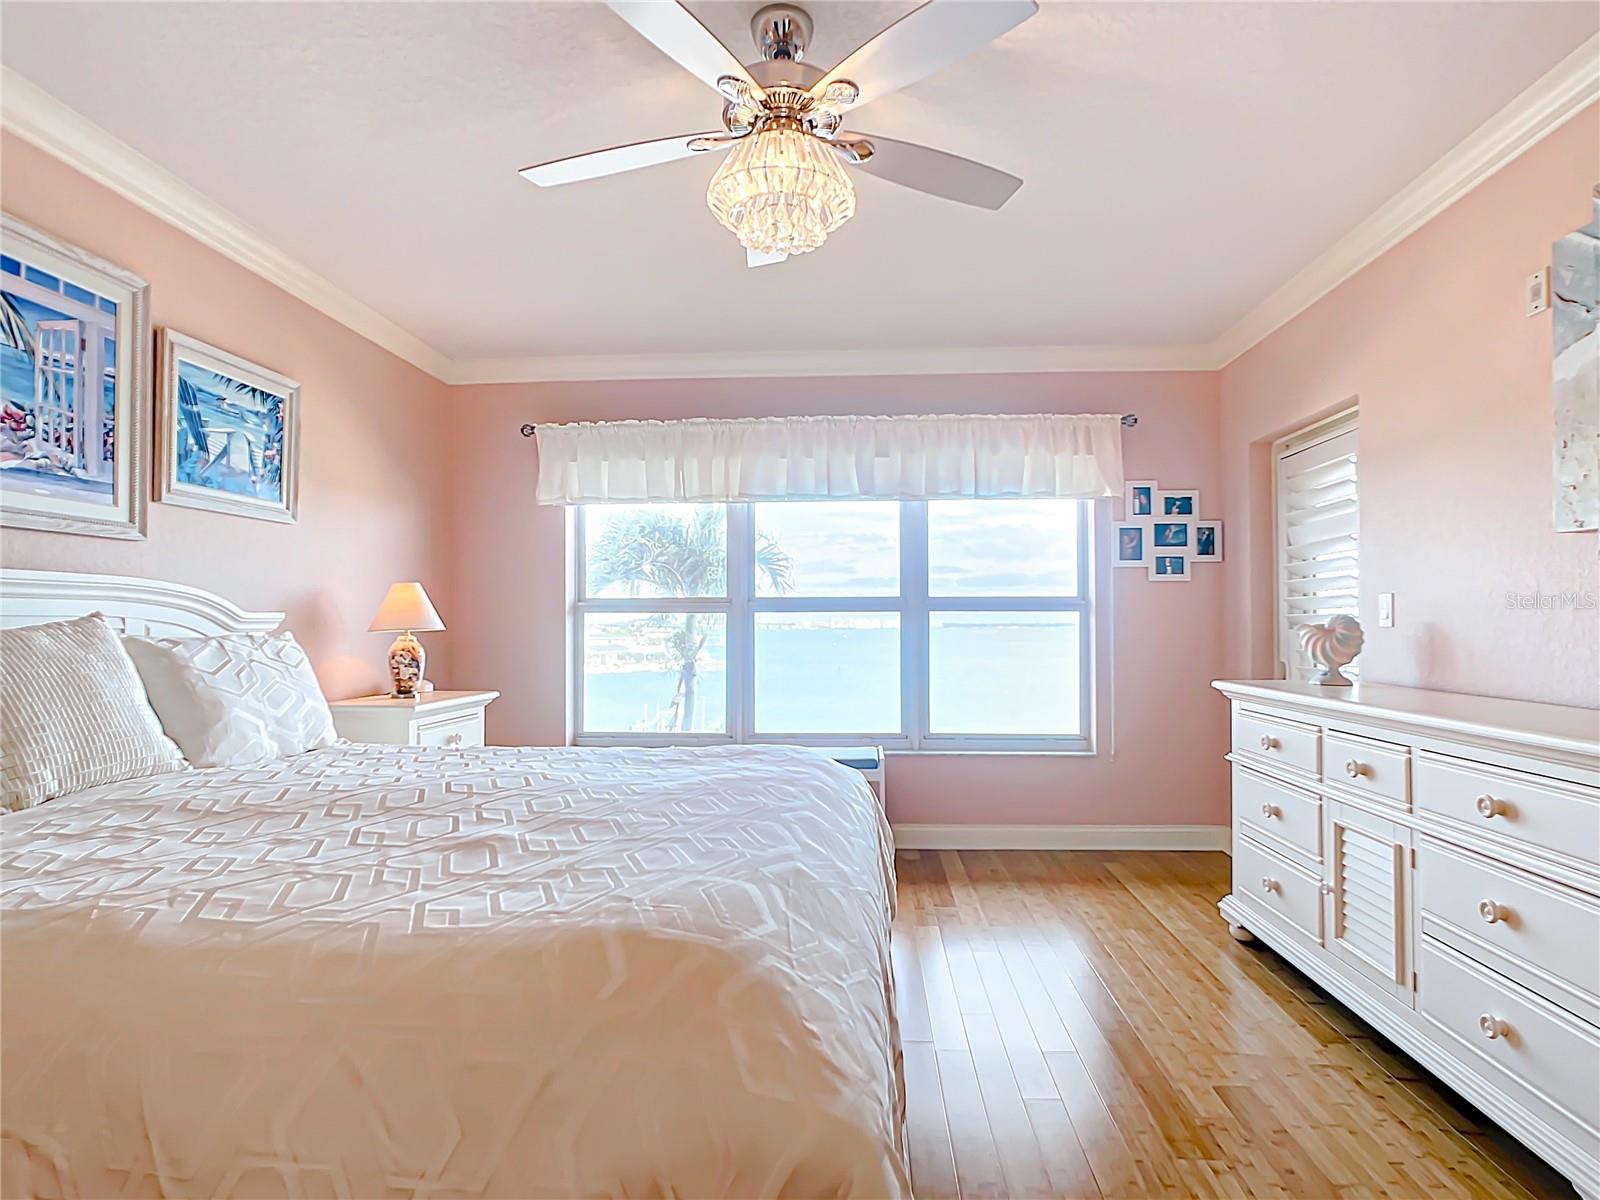 Your primary bedroom has beautiful views looking out to the open water.